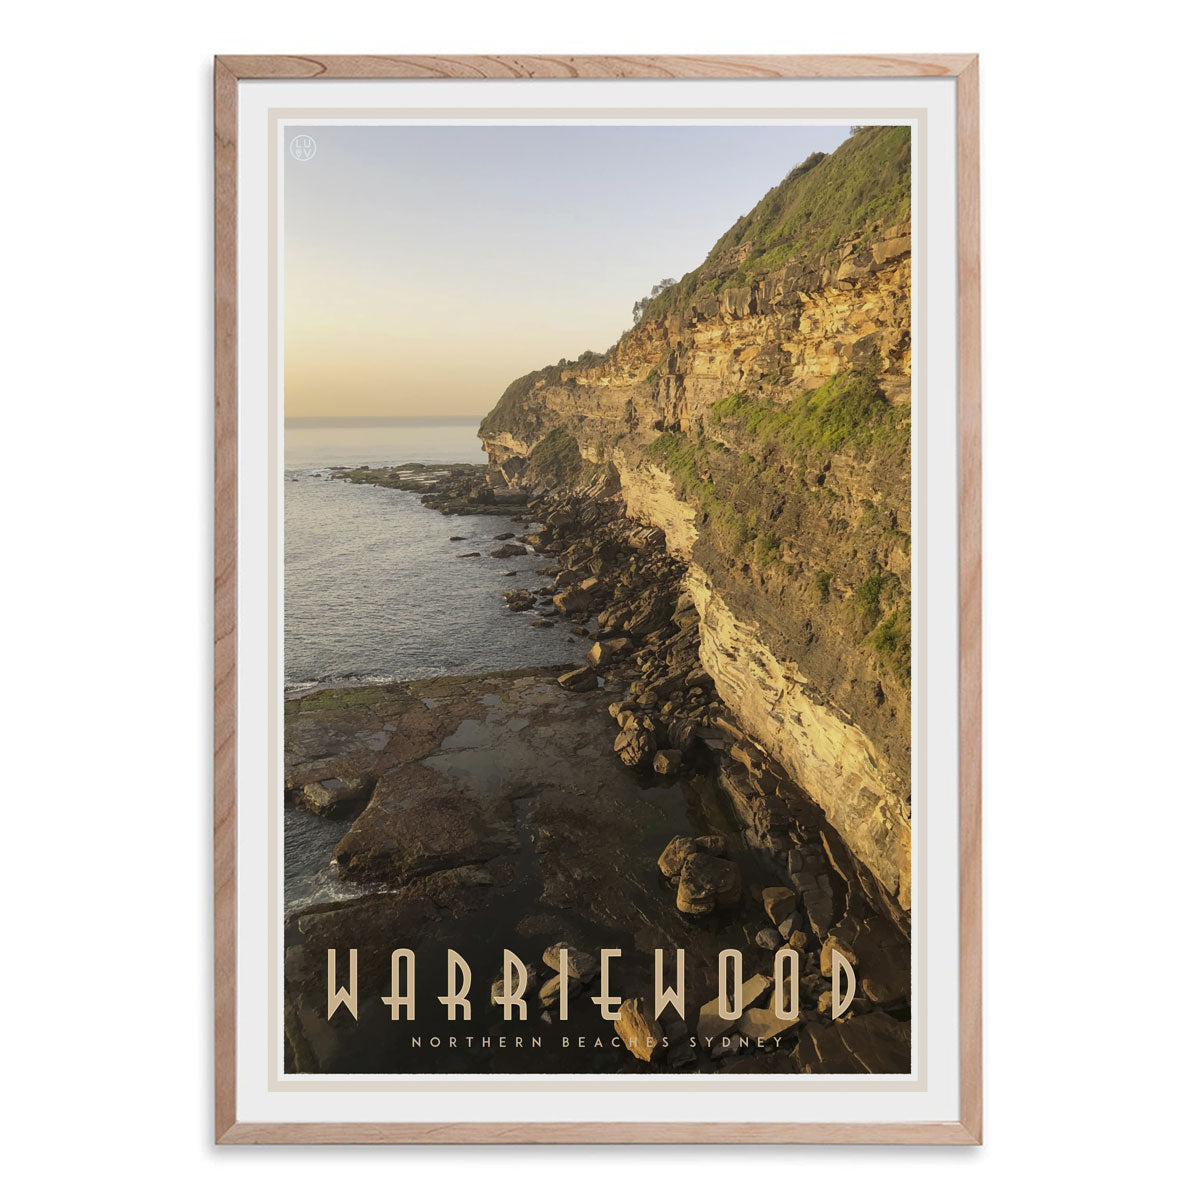 Warriewood vintage travel style oak framed print designed by places we luv